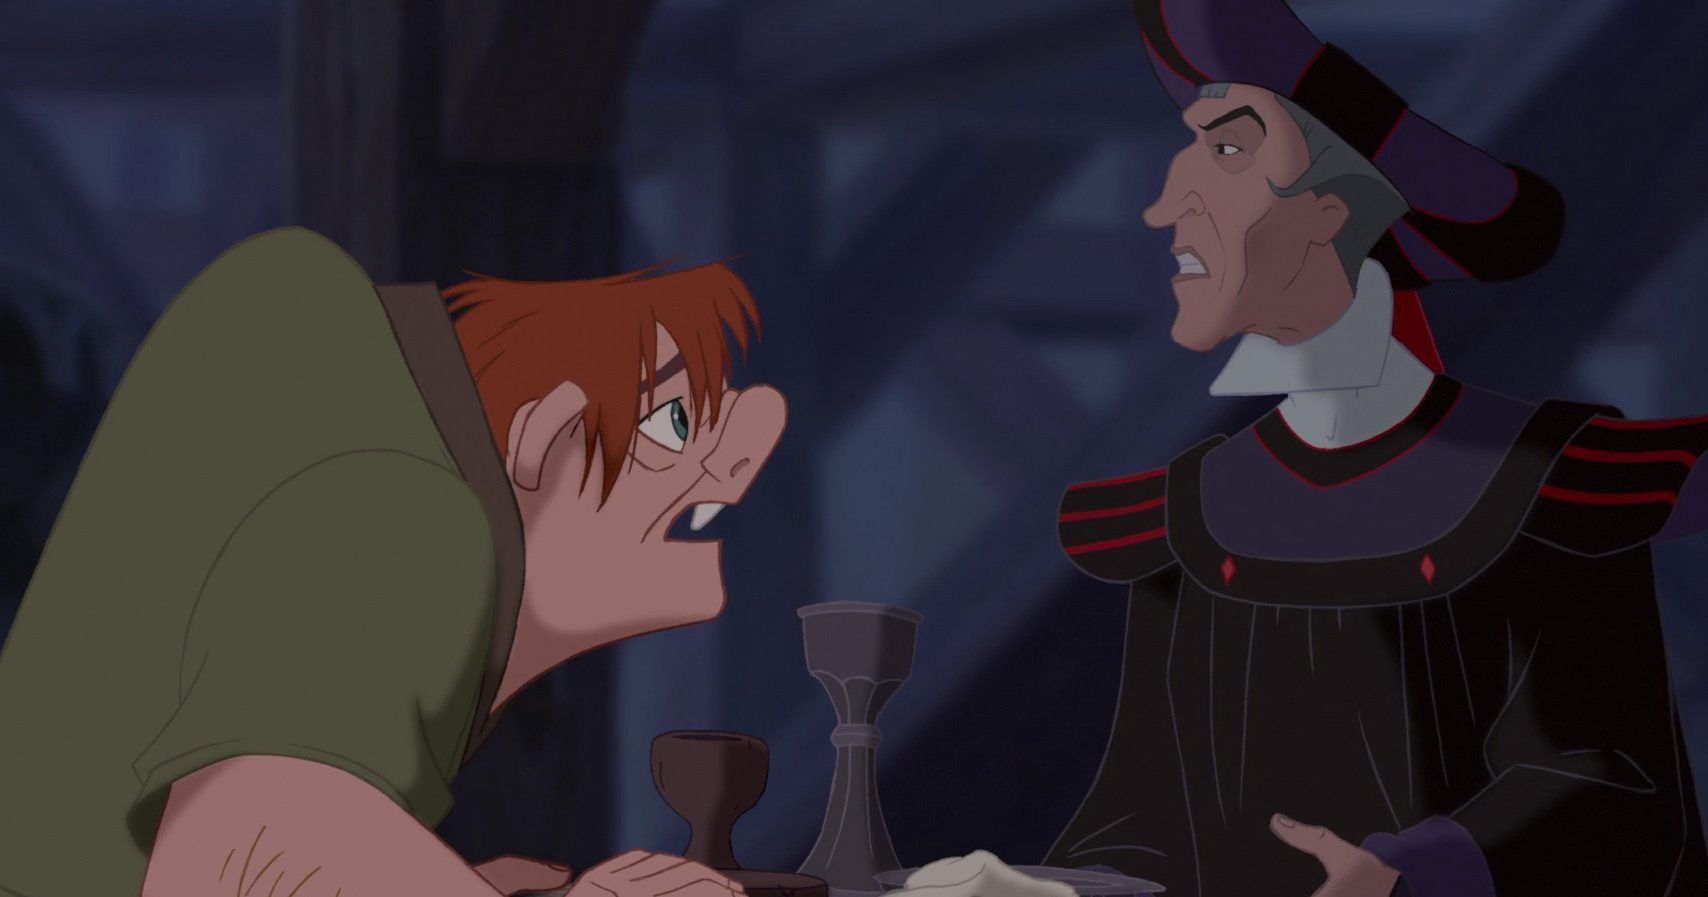 2. The Hunchback Of Notre Dame: It is an improbable approach for a Disney movie. Judge Claude Is the nastiest Disney villain, fueled by lust. The Hunchback's music is also darker than other Disney movies. It does have some comic moments though. The ending has also been rewritten, but it is hard to clean up such a dark story thoroughly.